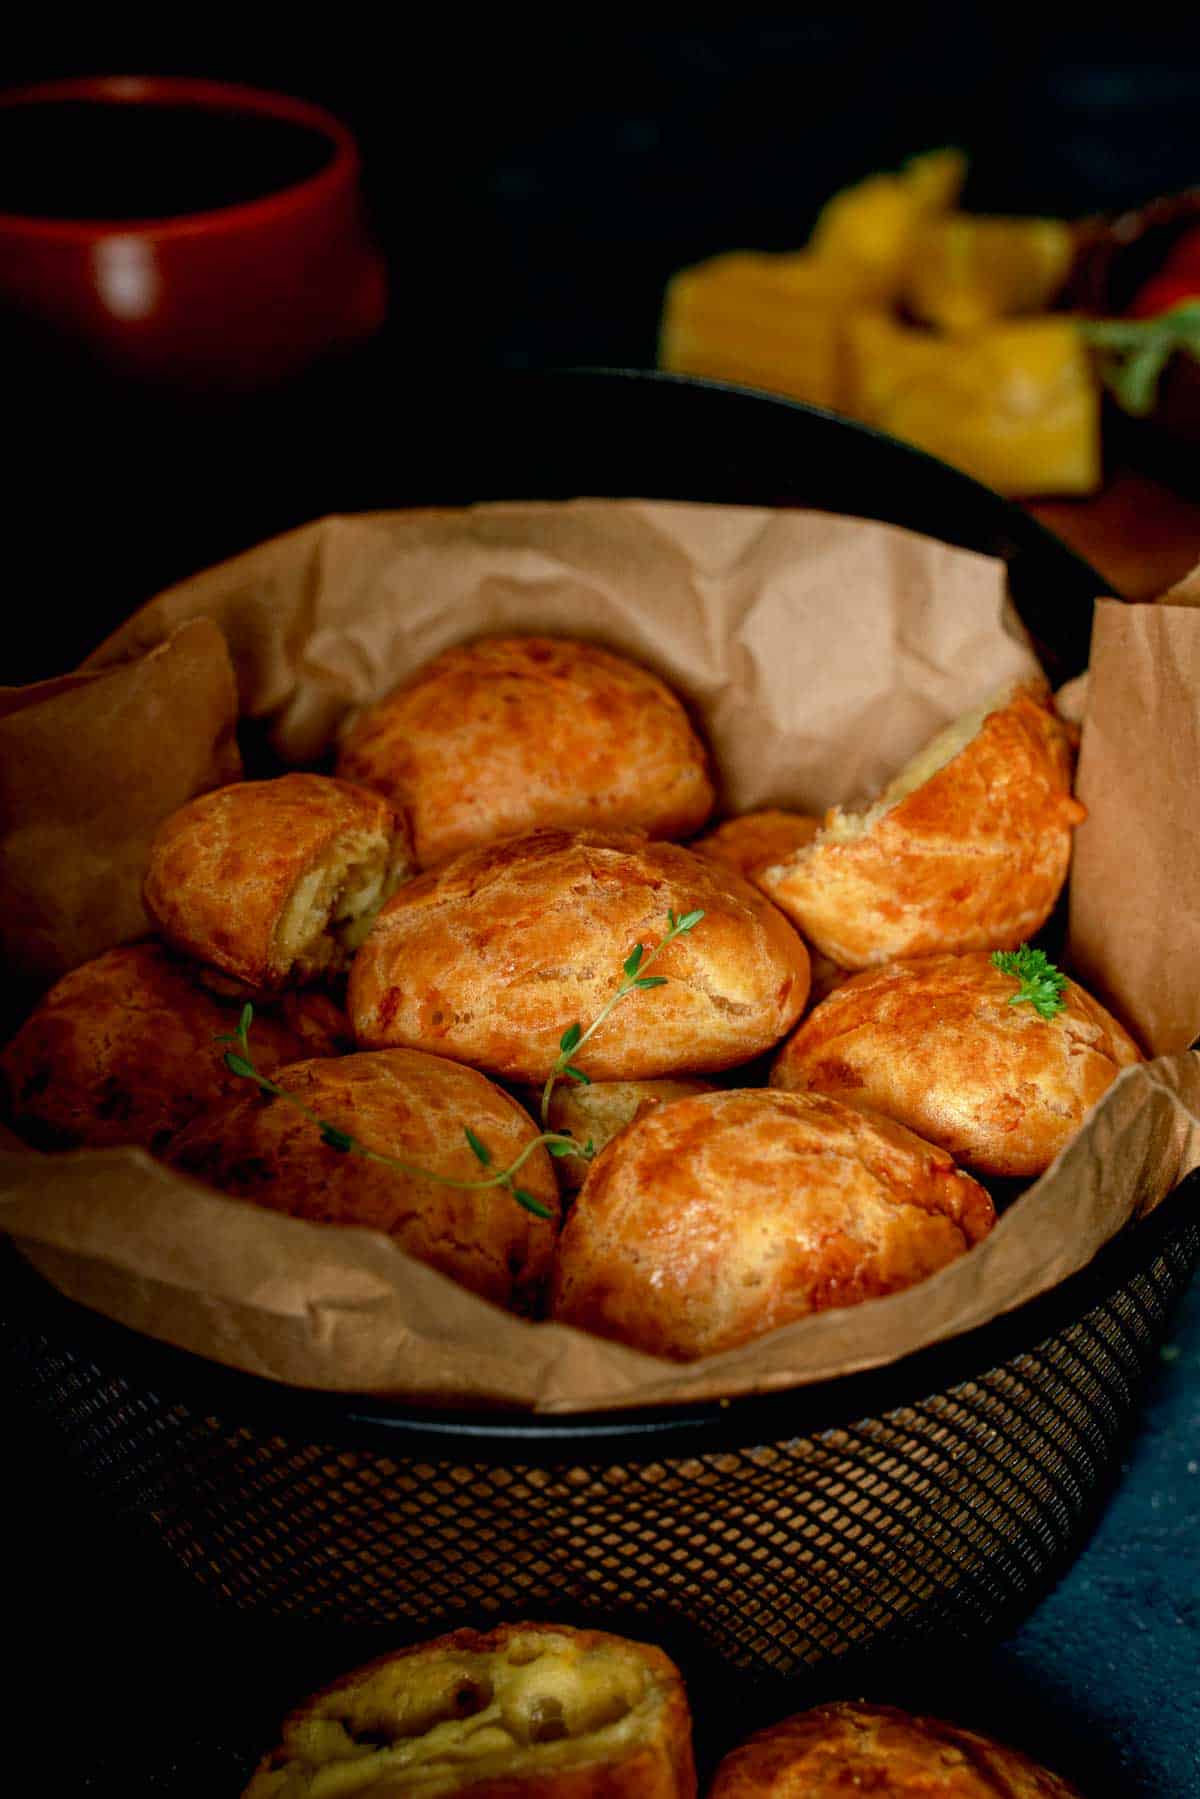 A rich and dark photo showing off a basket of french cheese puffs wrapped in paper.